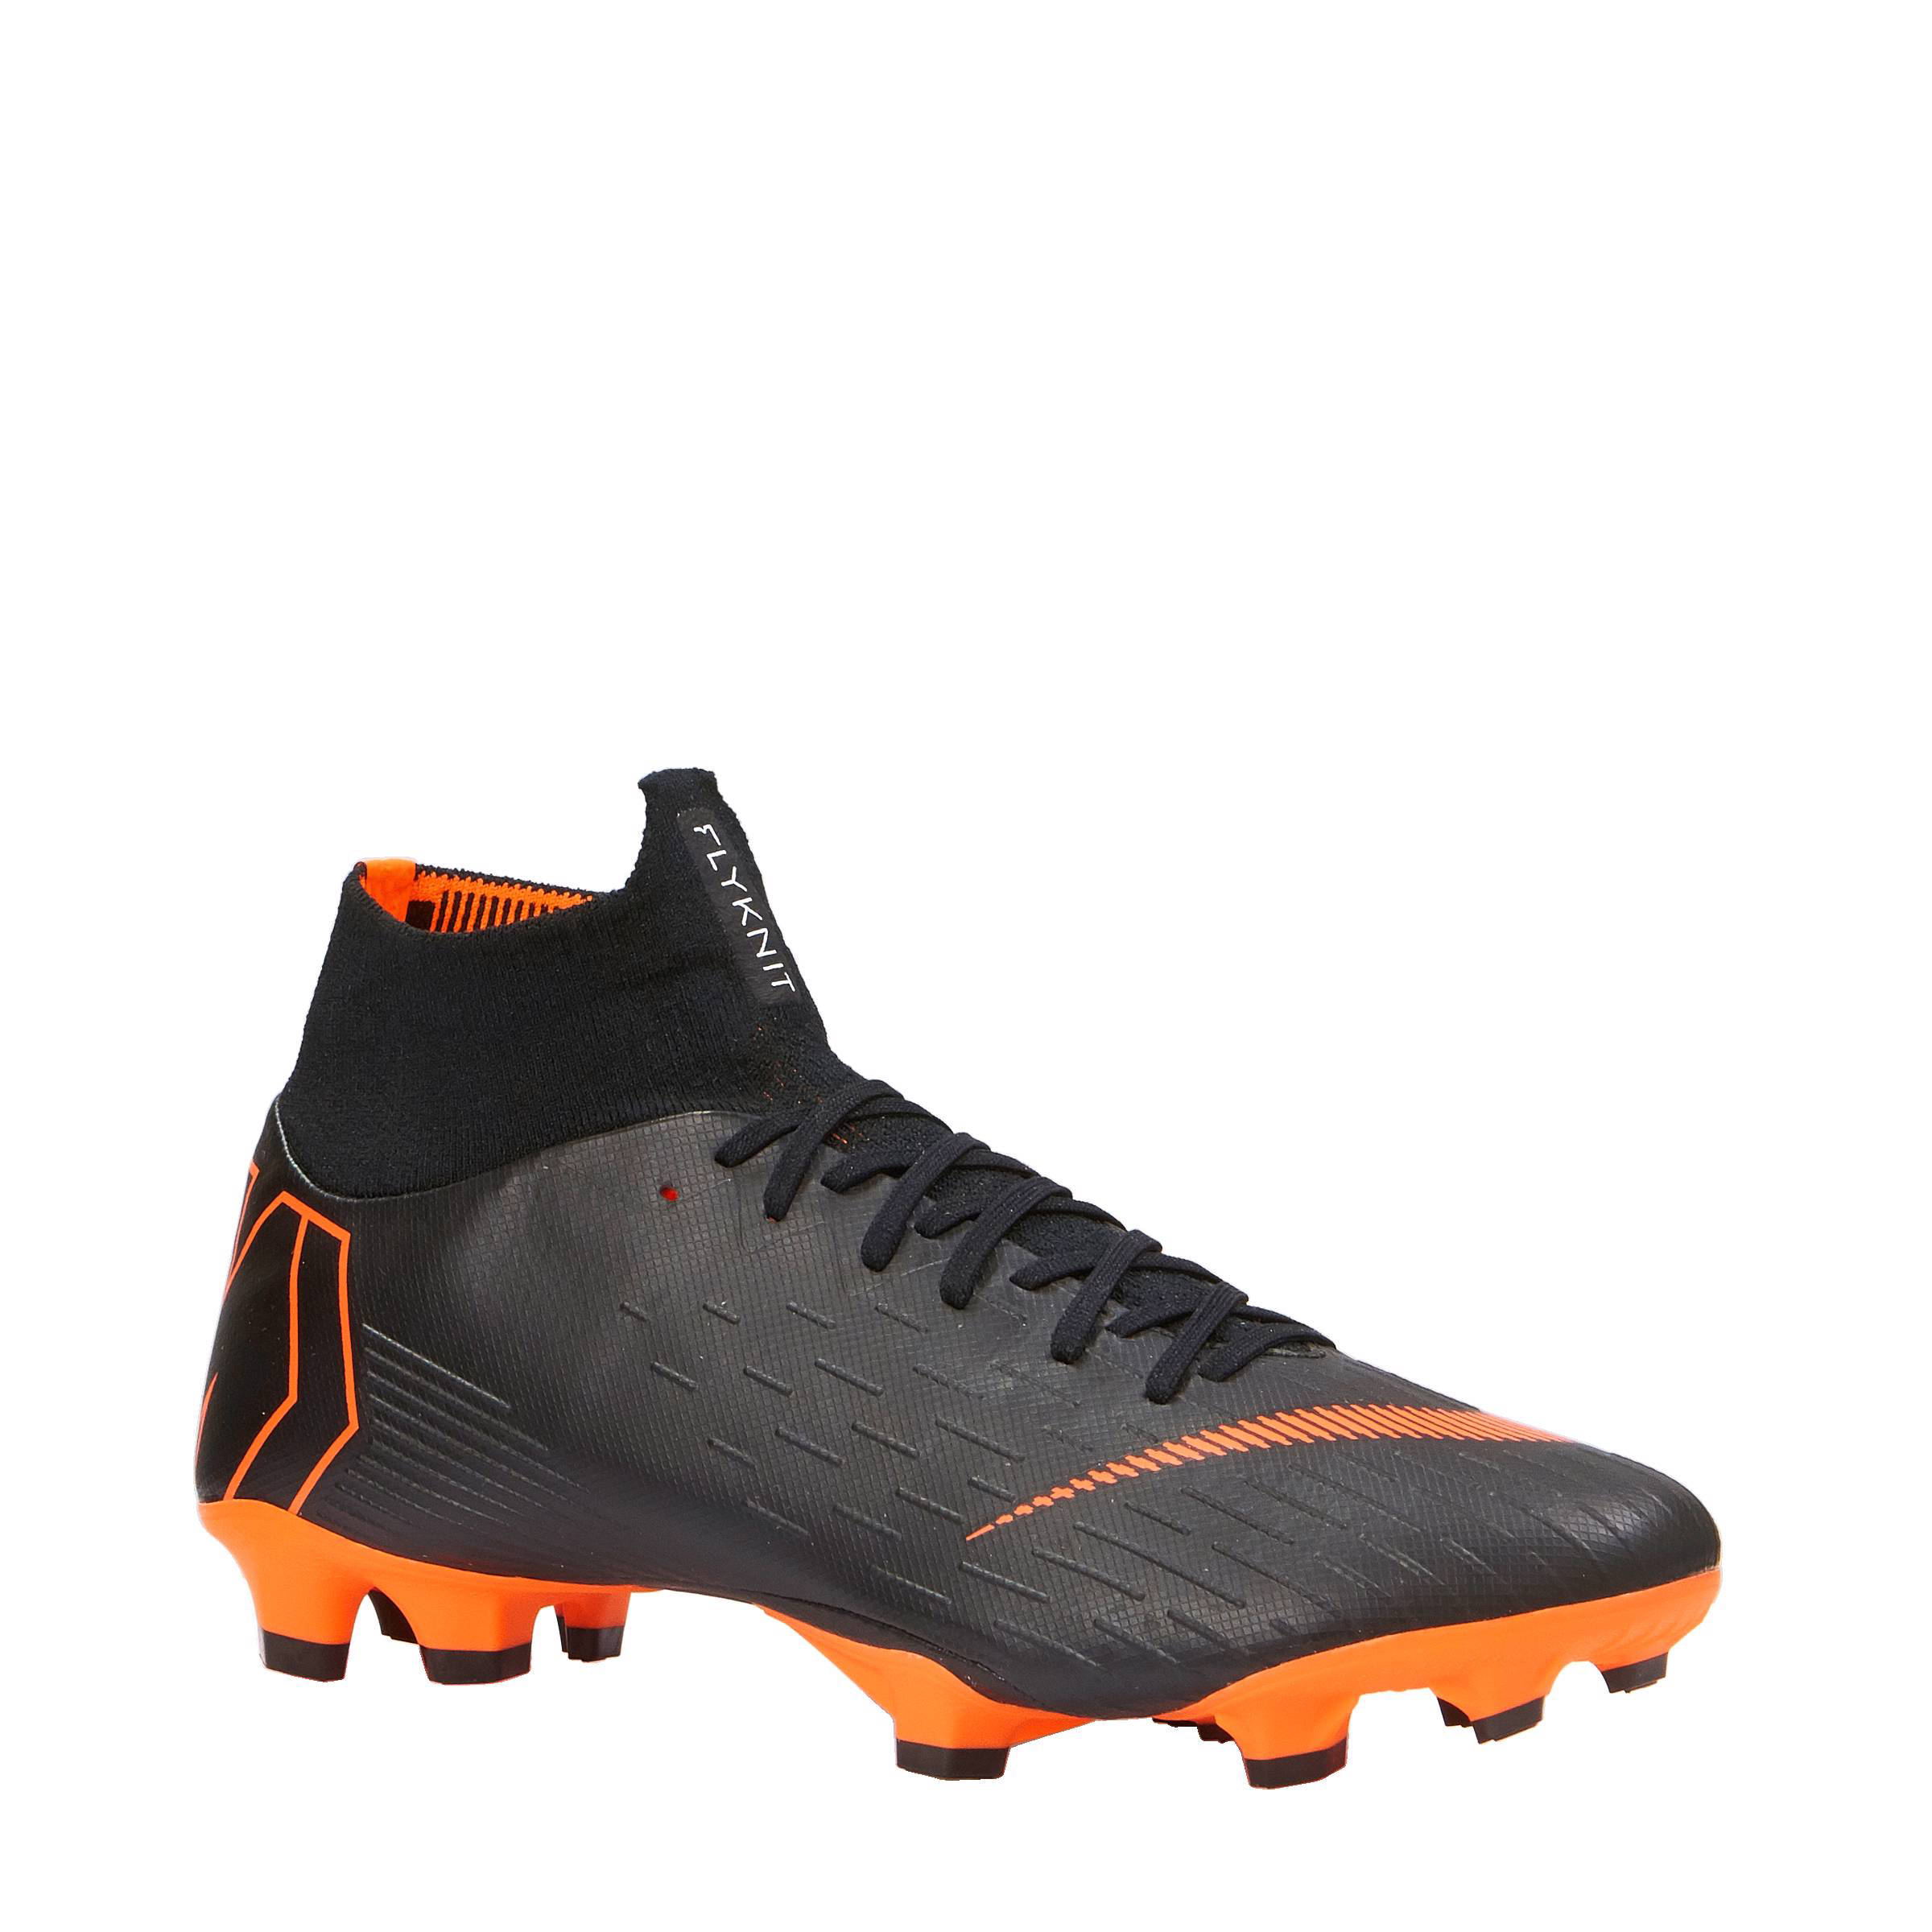 Reduce price Nike Superfly 6 Pro FG Firm Ground Soccer Cleat.